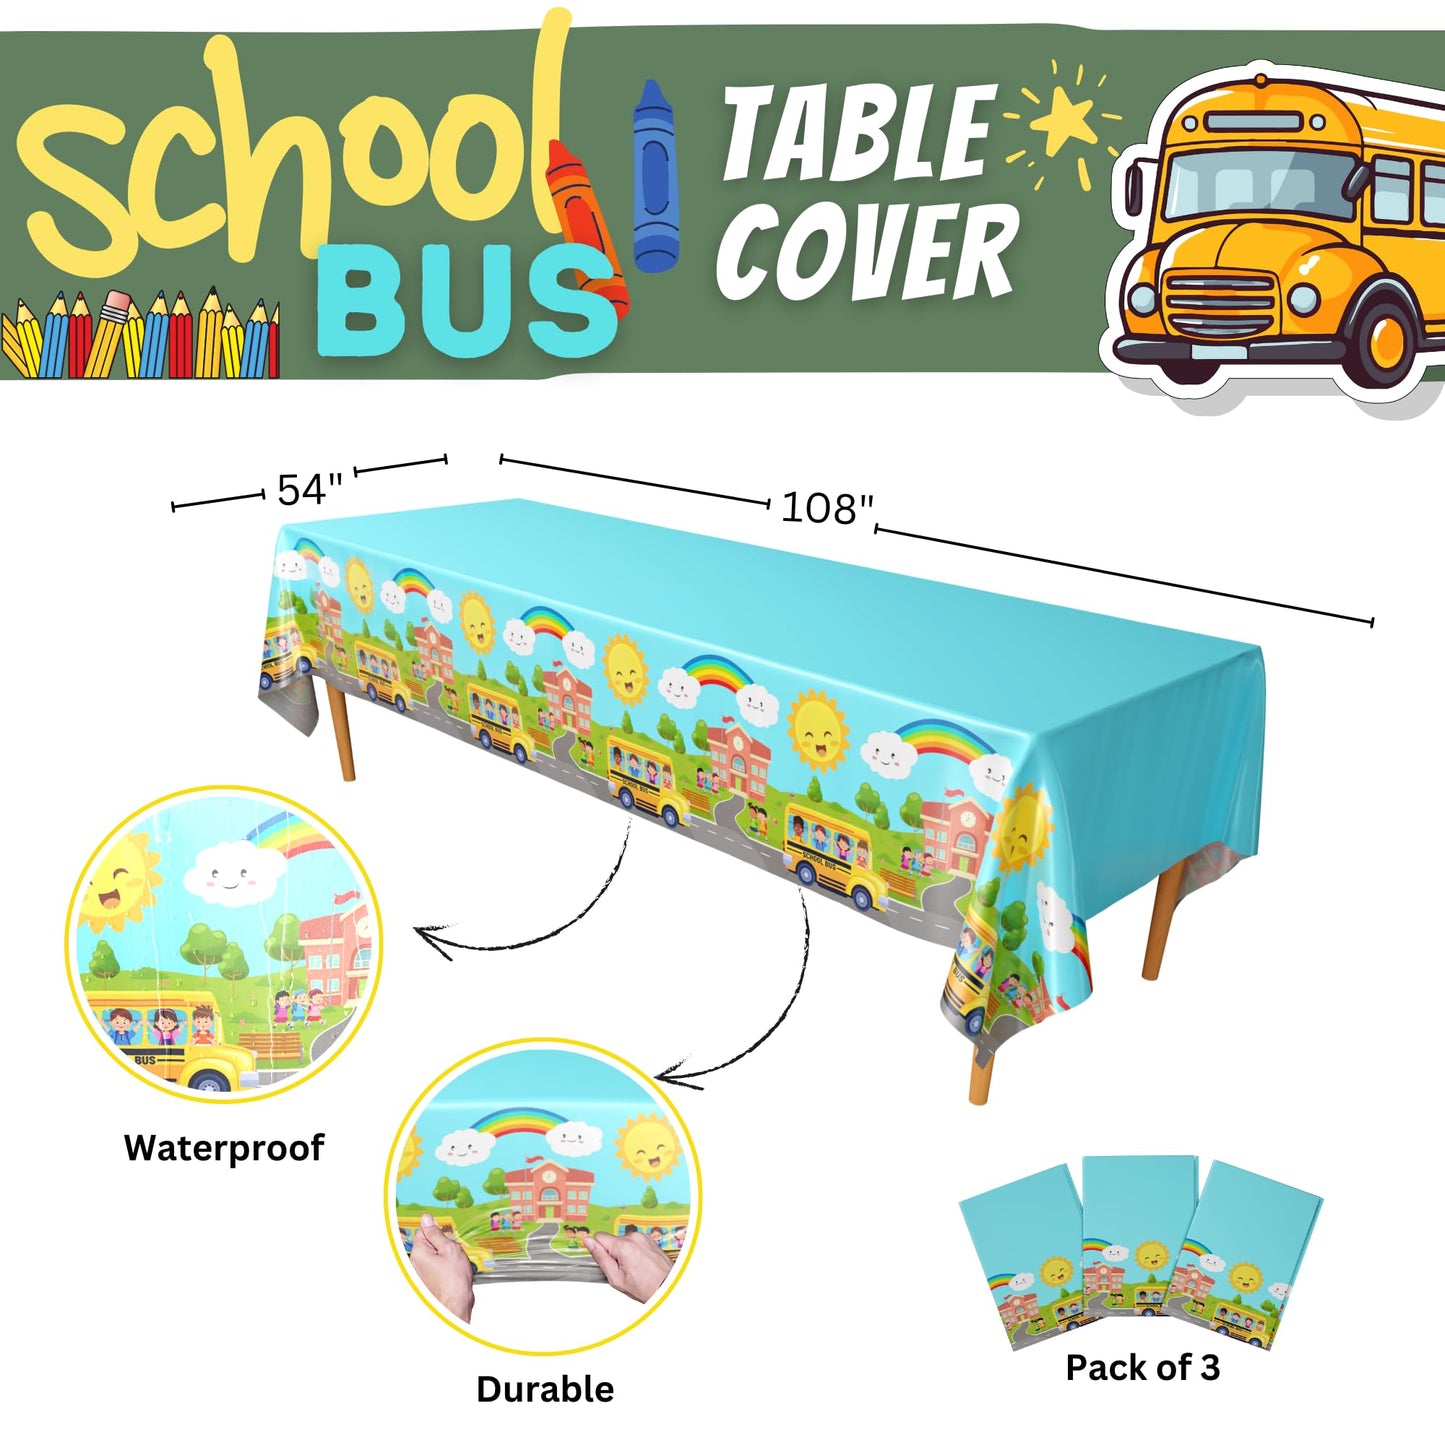 School Bus Tablecovers - 54in x 108in (3 Pack)